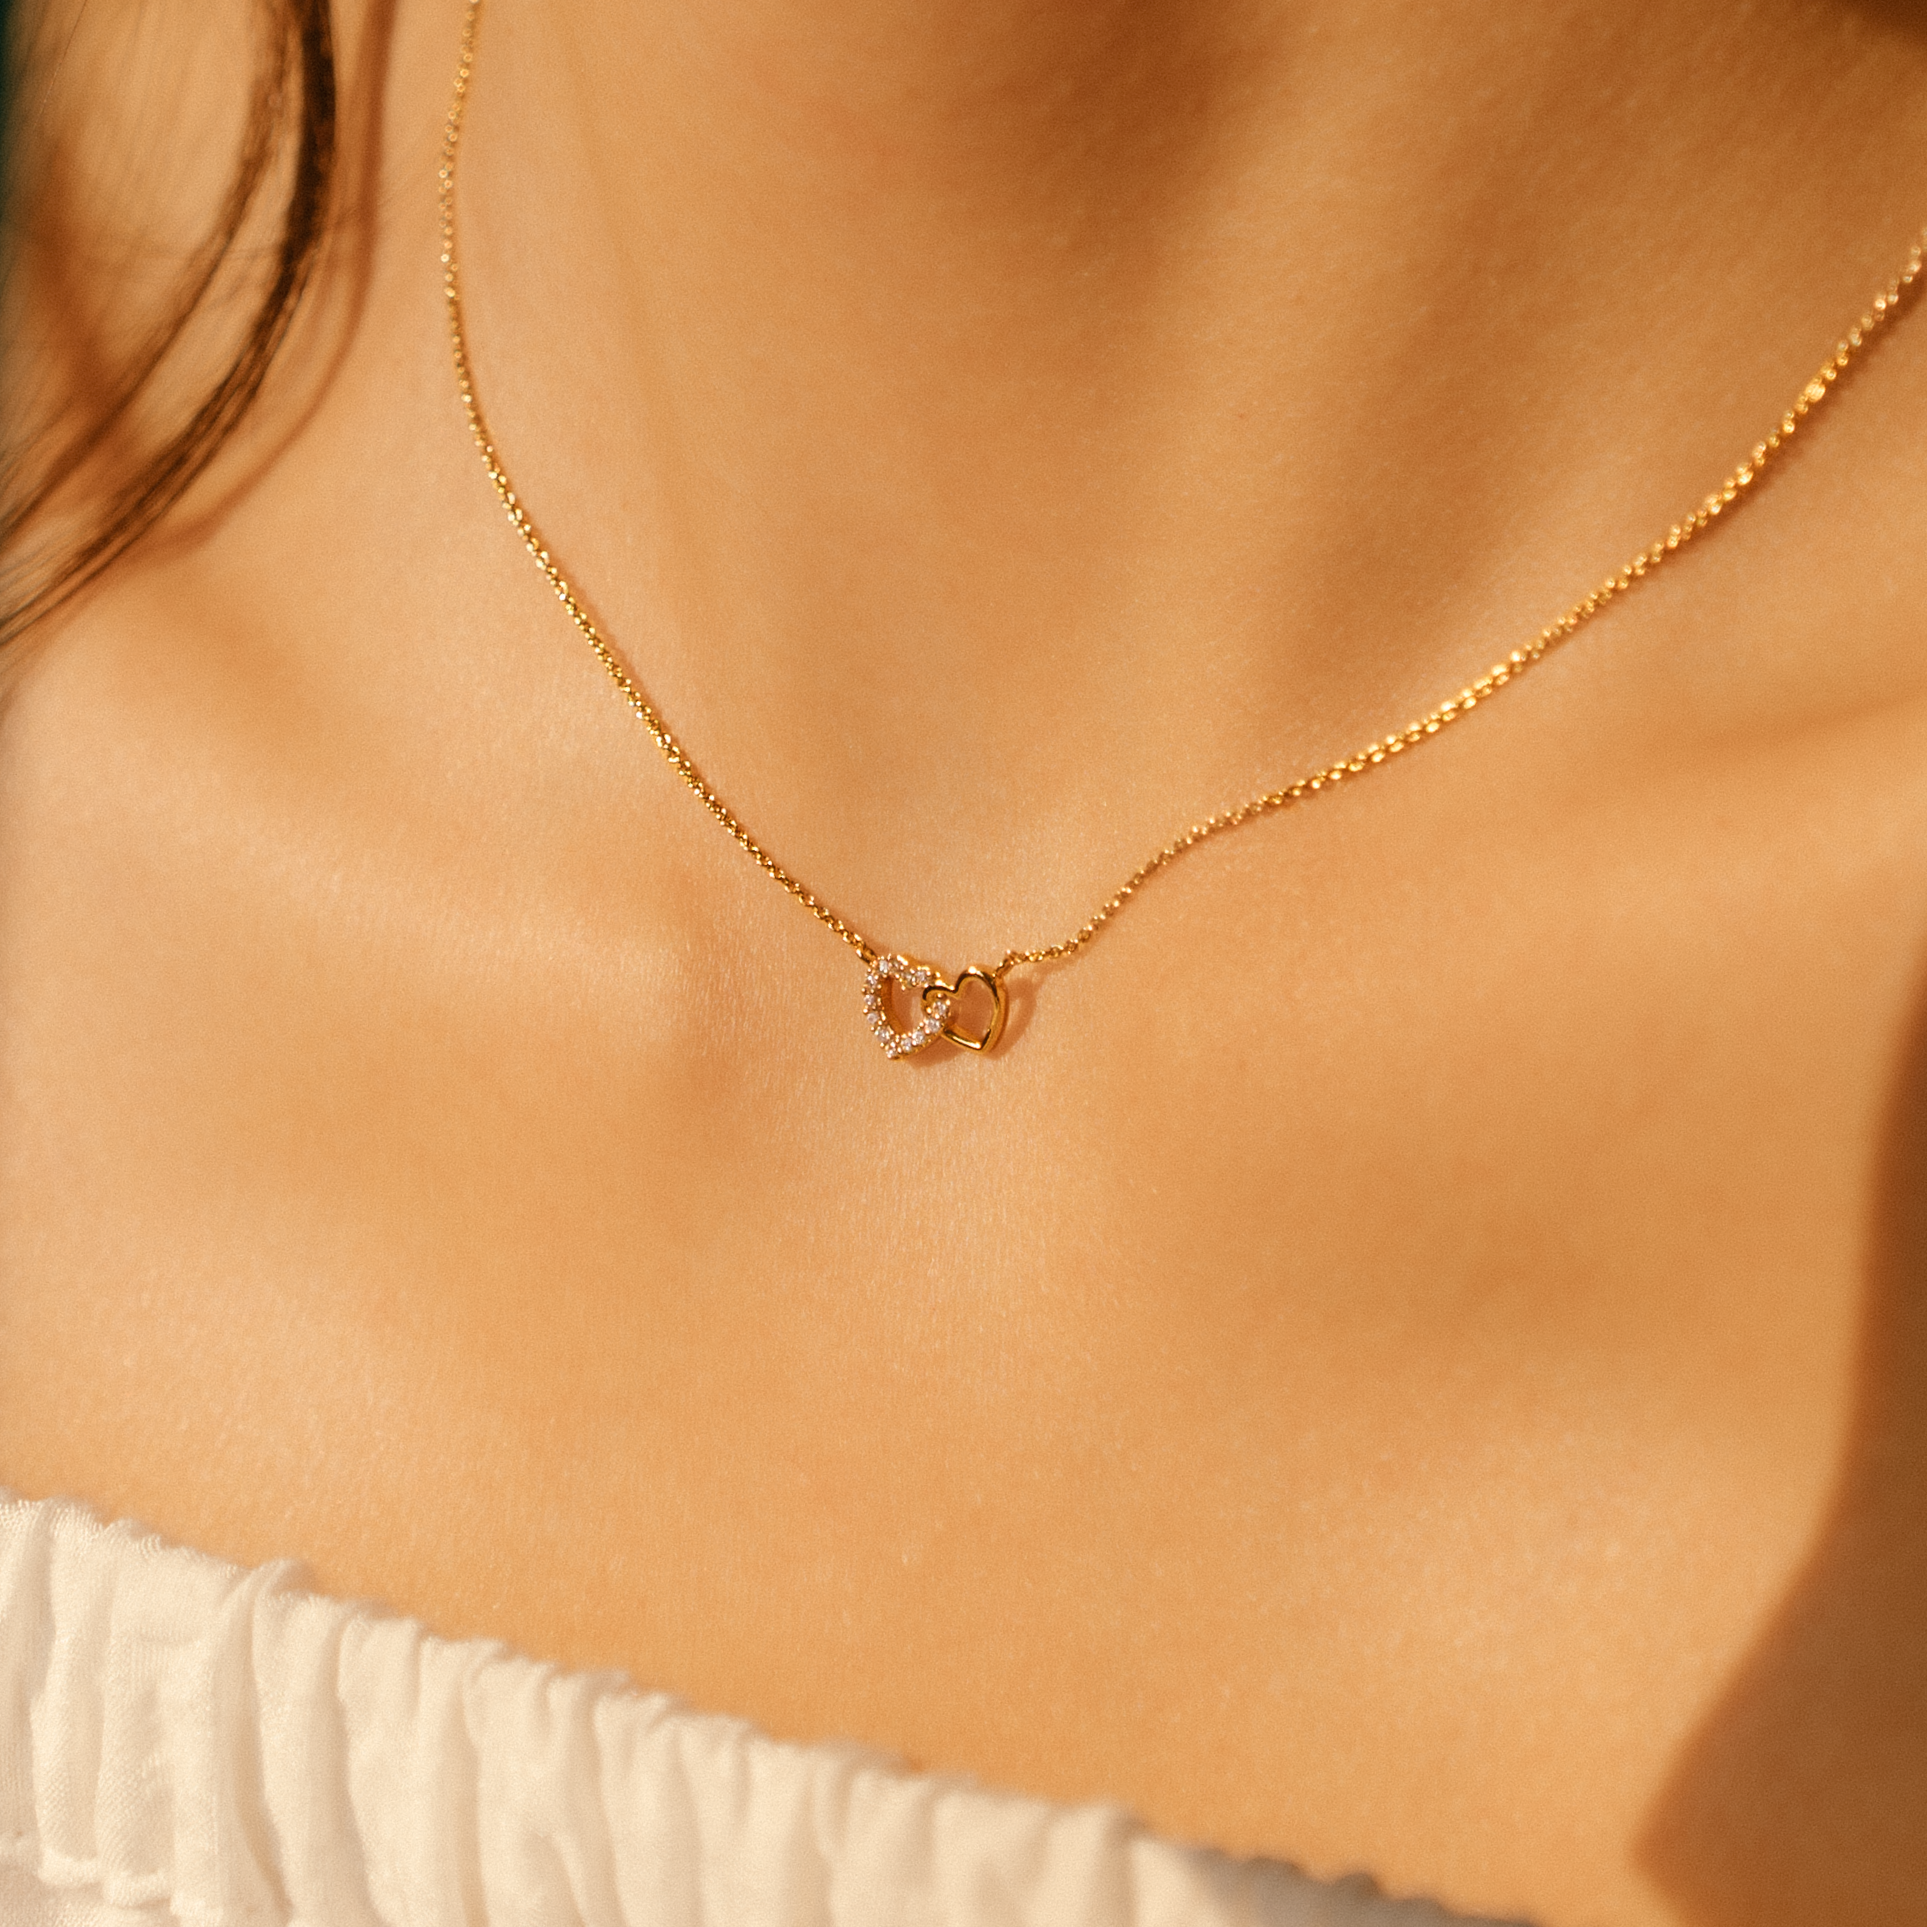 Model is wearing elegant and dainty necklace with cubic zirconia stones in gold.